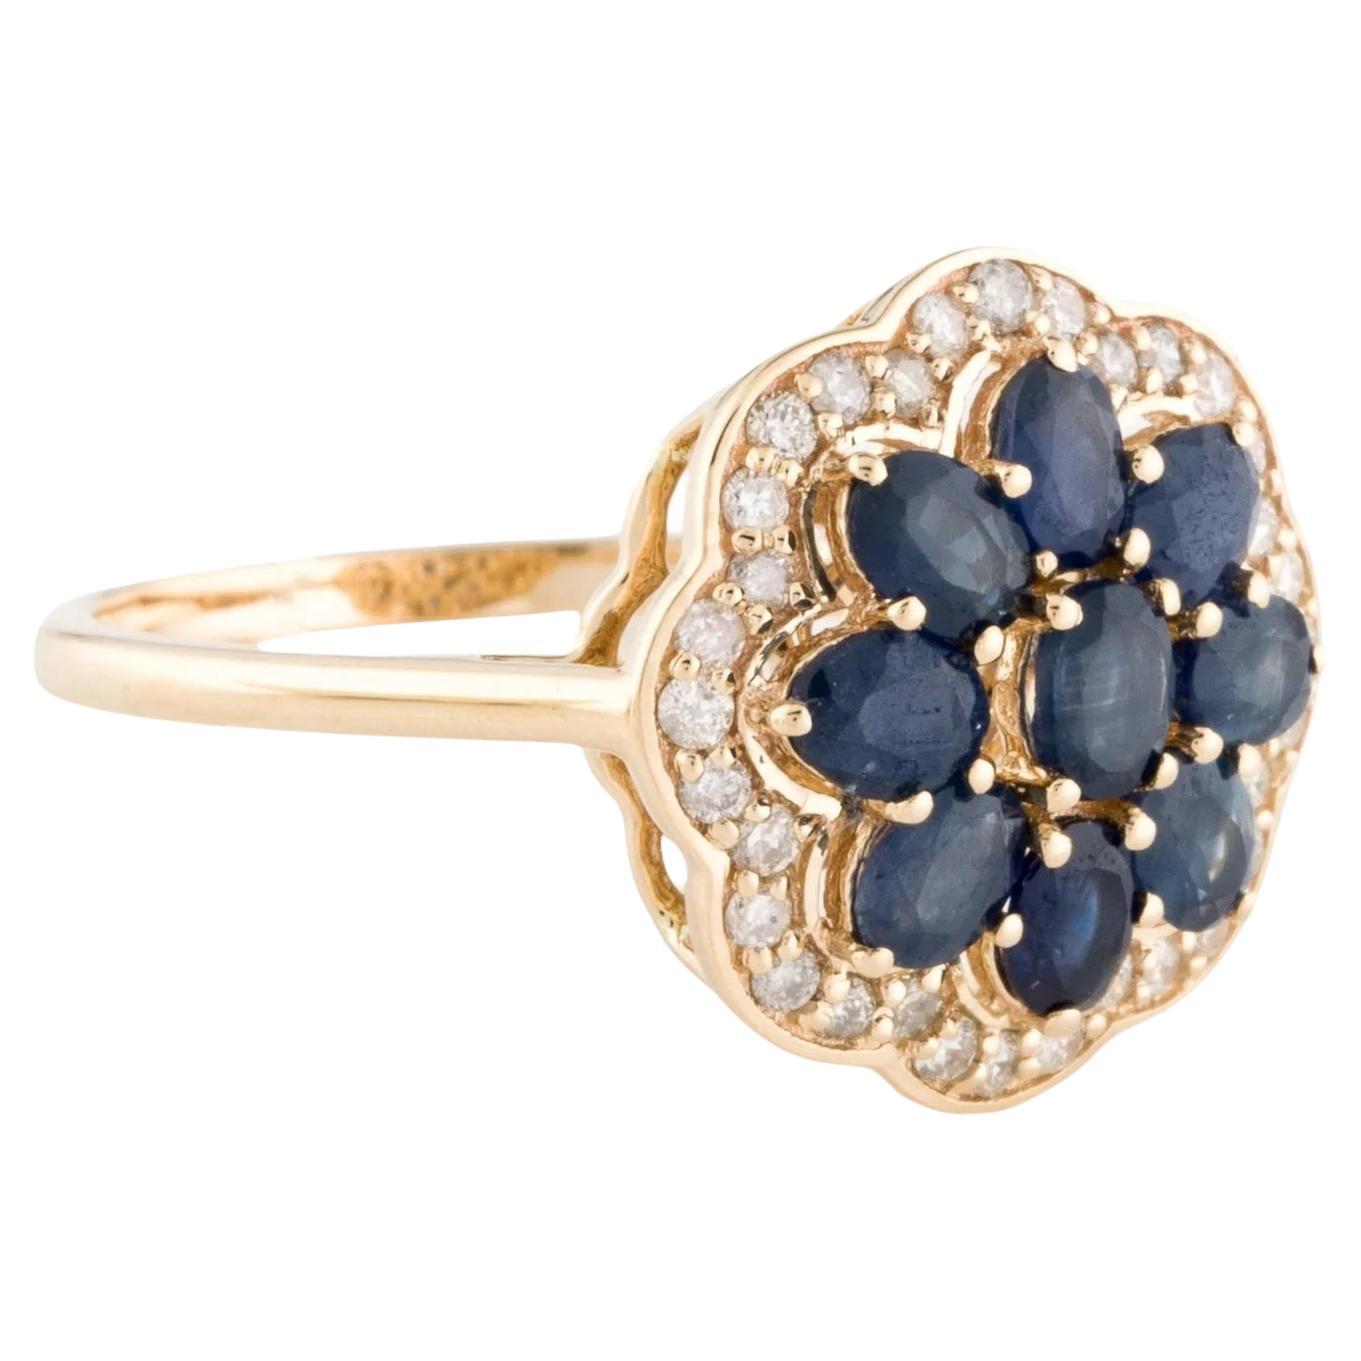 14K Sapphire & Diamond Cocktail Ring  1.43ct Oval Sapphire  Yellow Gold Size 8